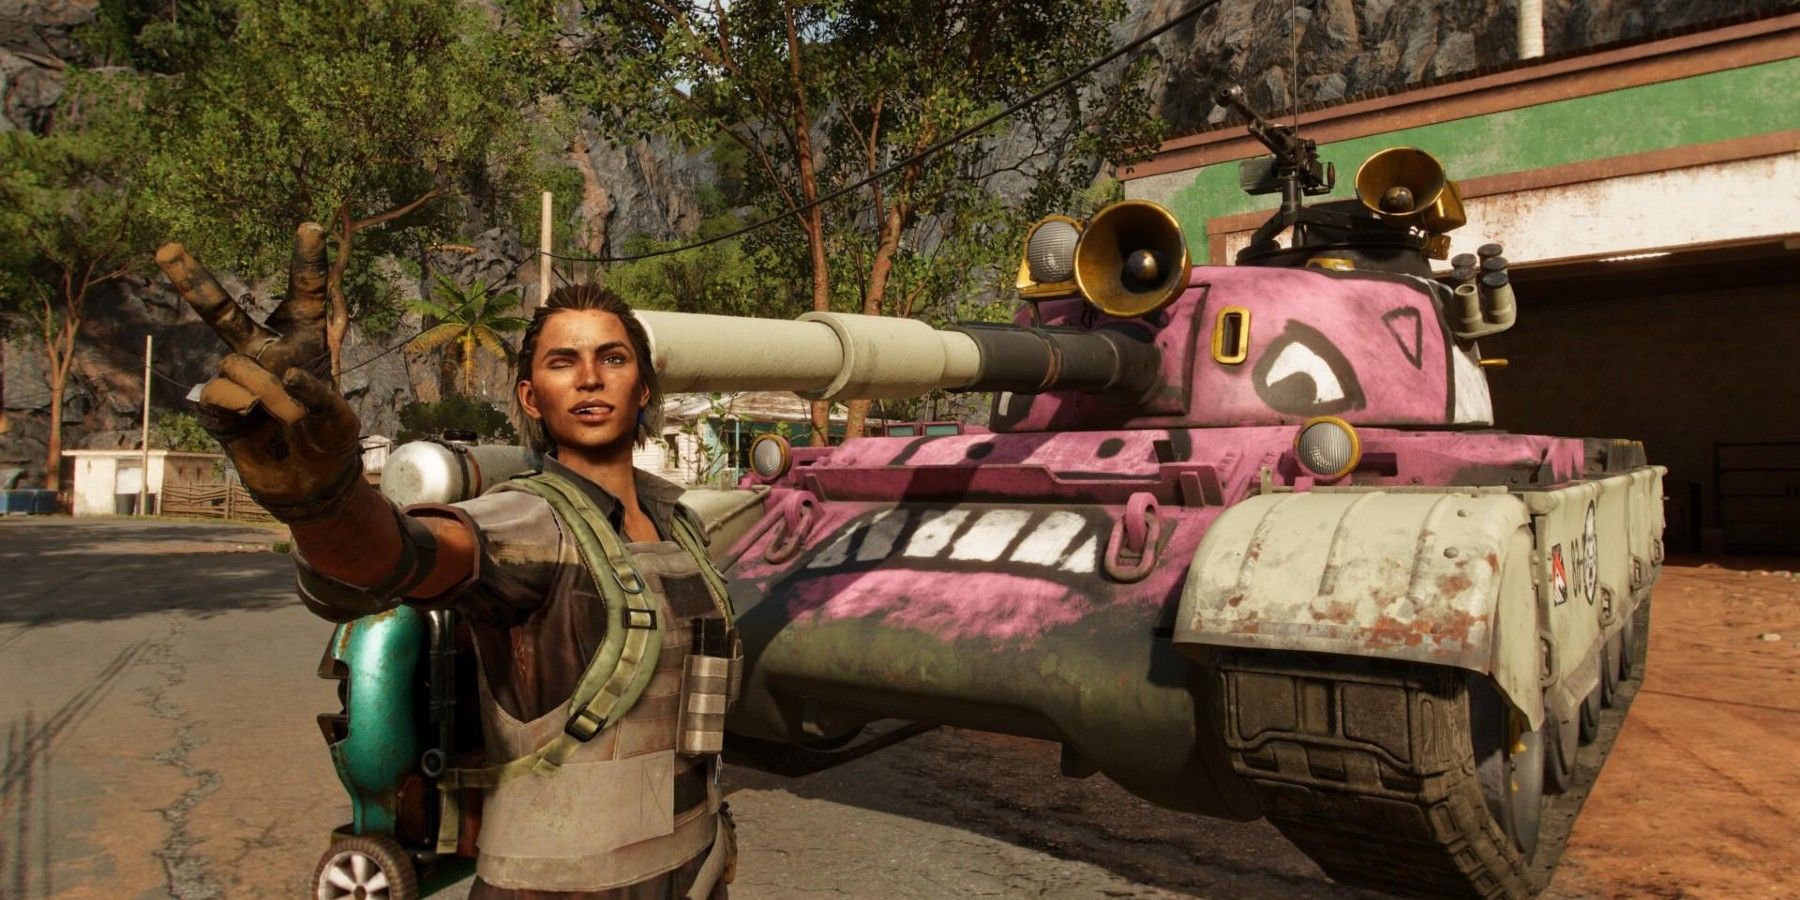 Far Cry 6 Senor Pinga pink painted tank and Libertad fighter peace sign